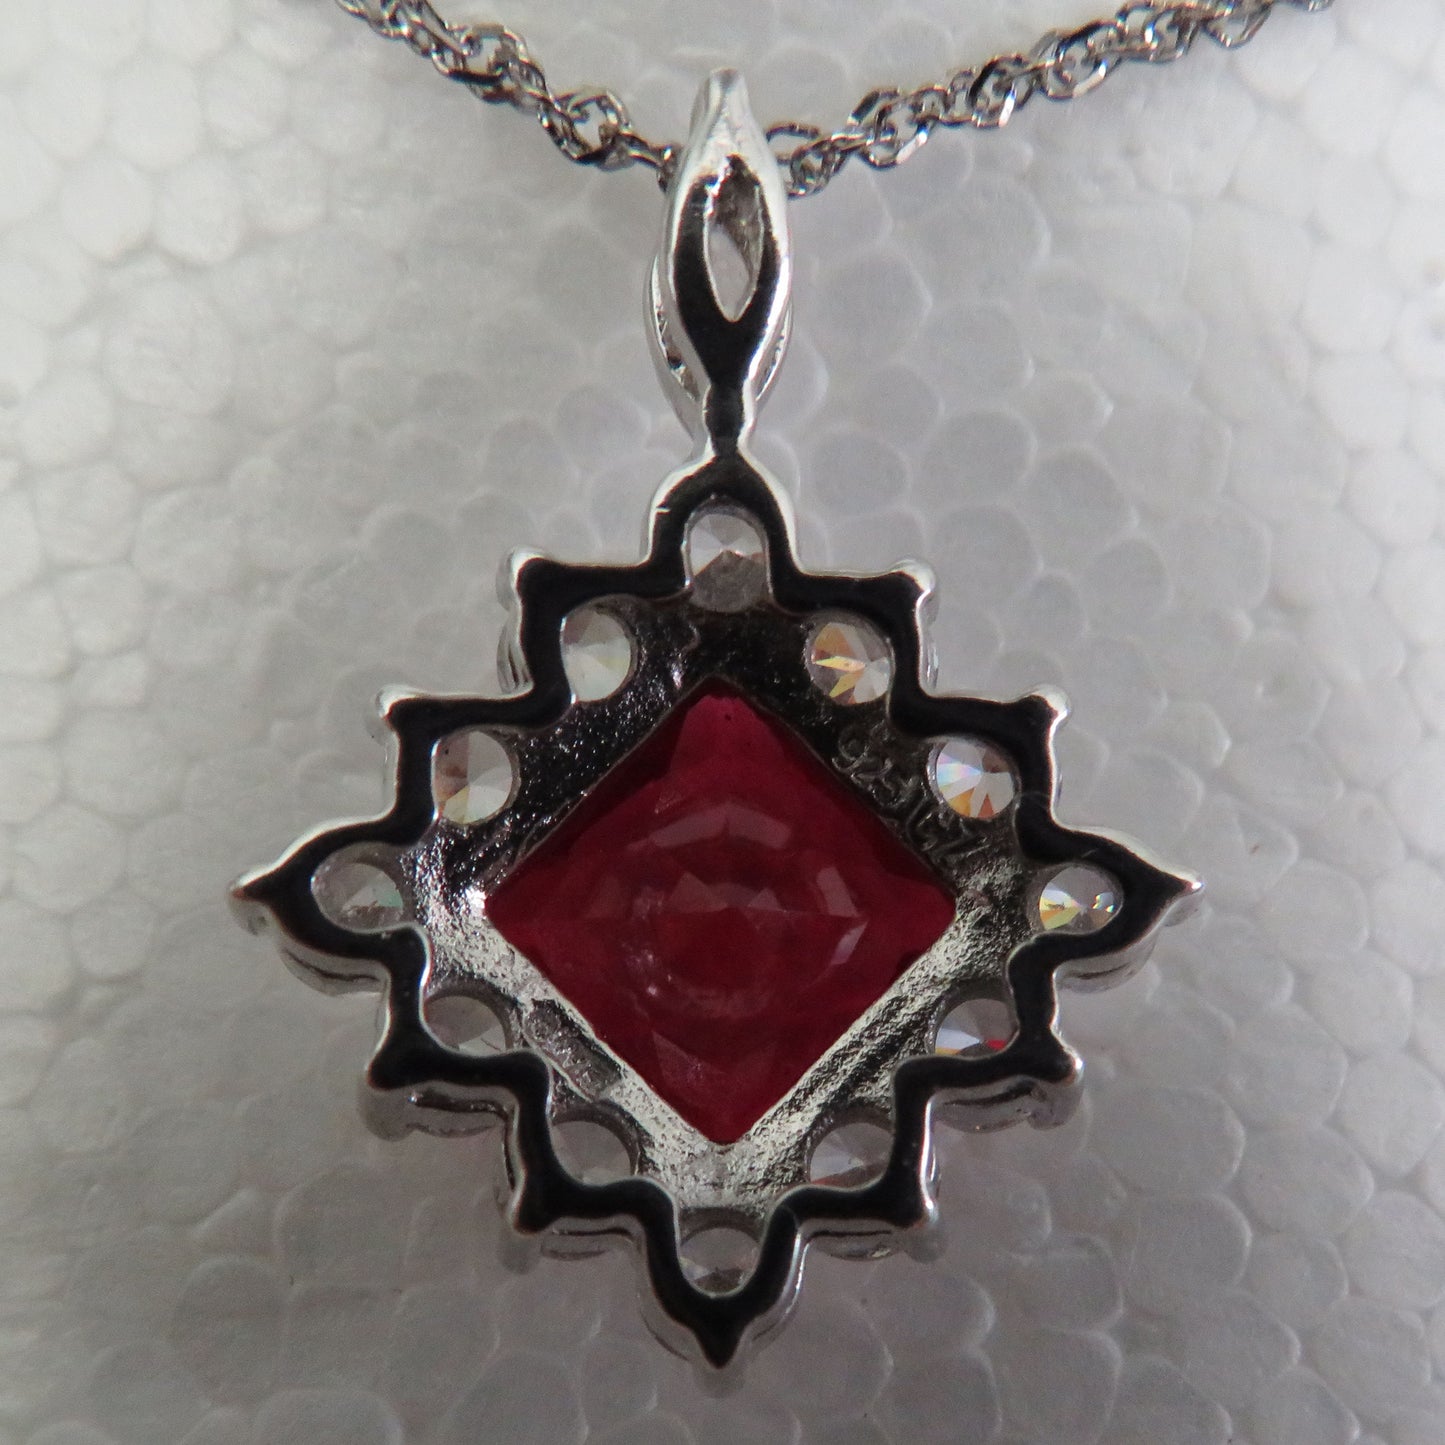 925 Silver Pendant Set With A Manufactured Ruby Surrounded By Claw Set Cubic Zirconia